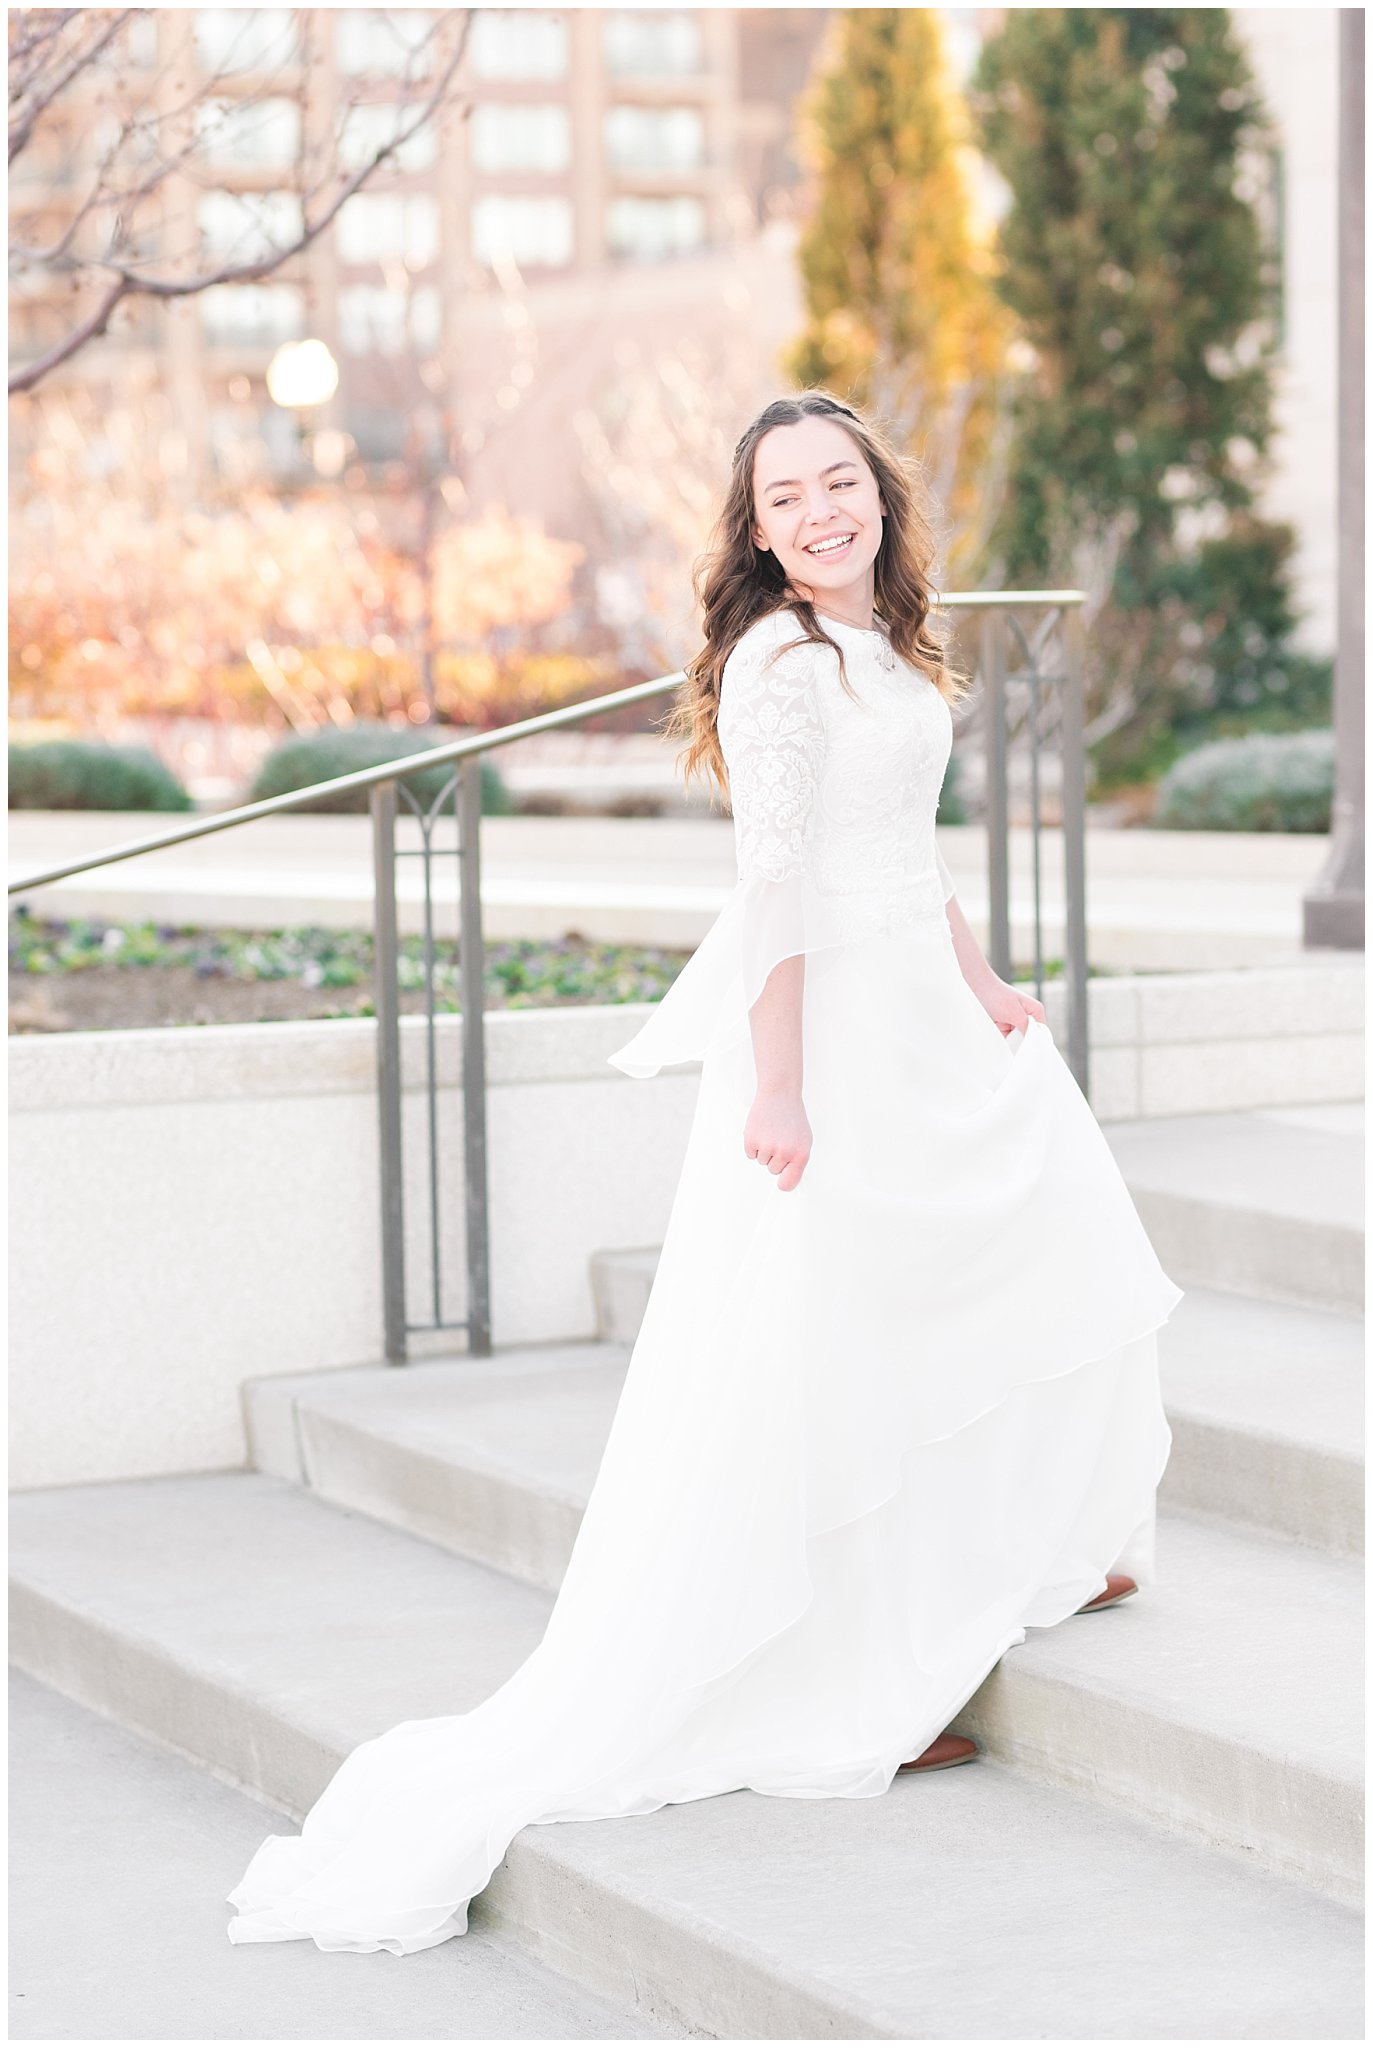 Bride walks up the stairs at the Ogden Temple in an Elizabeth Cooper dress | Top Utah Wedding and Couples Photos 2019 | Jessie and Dallin Photography